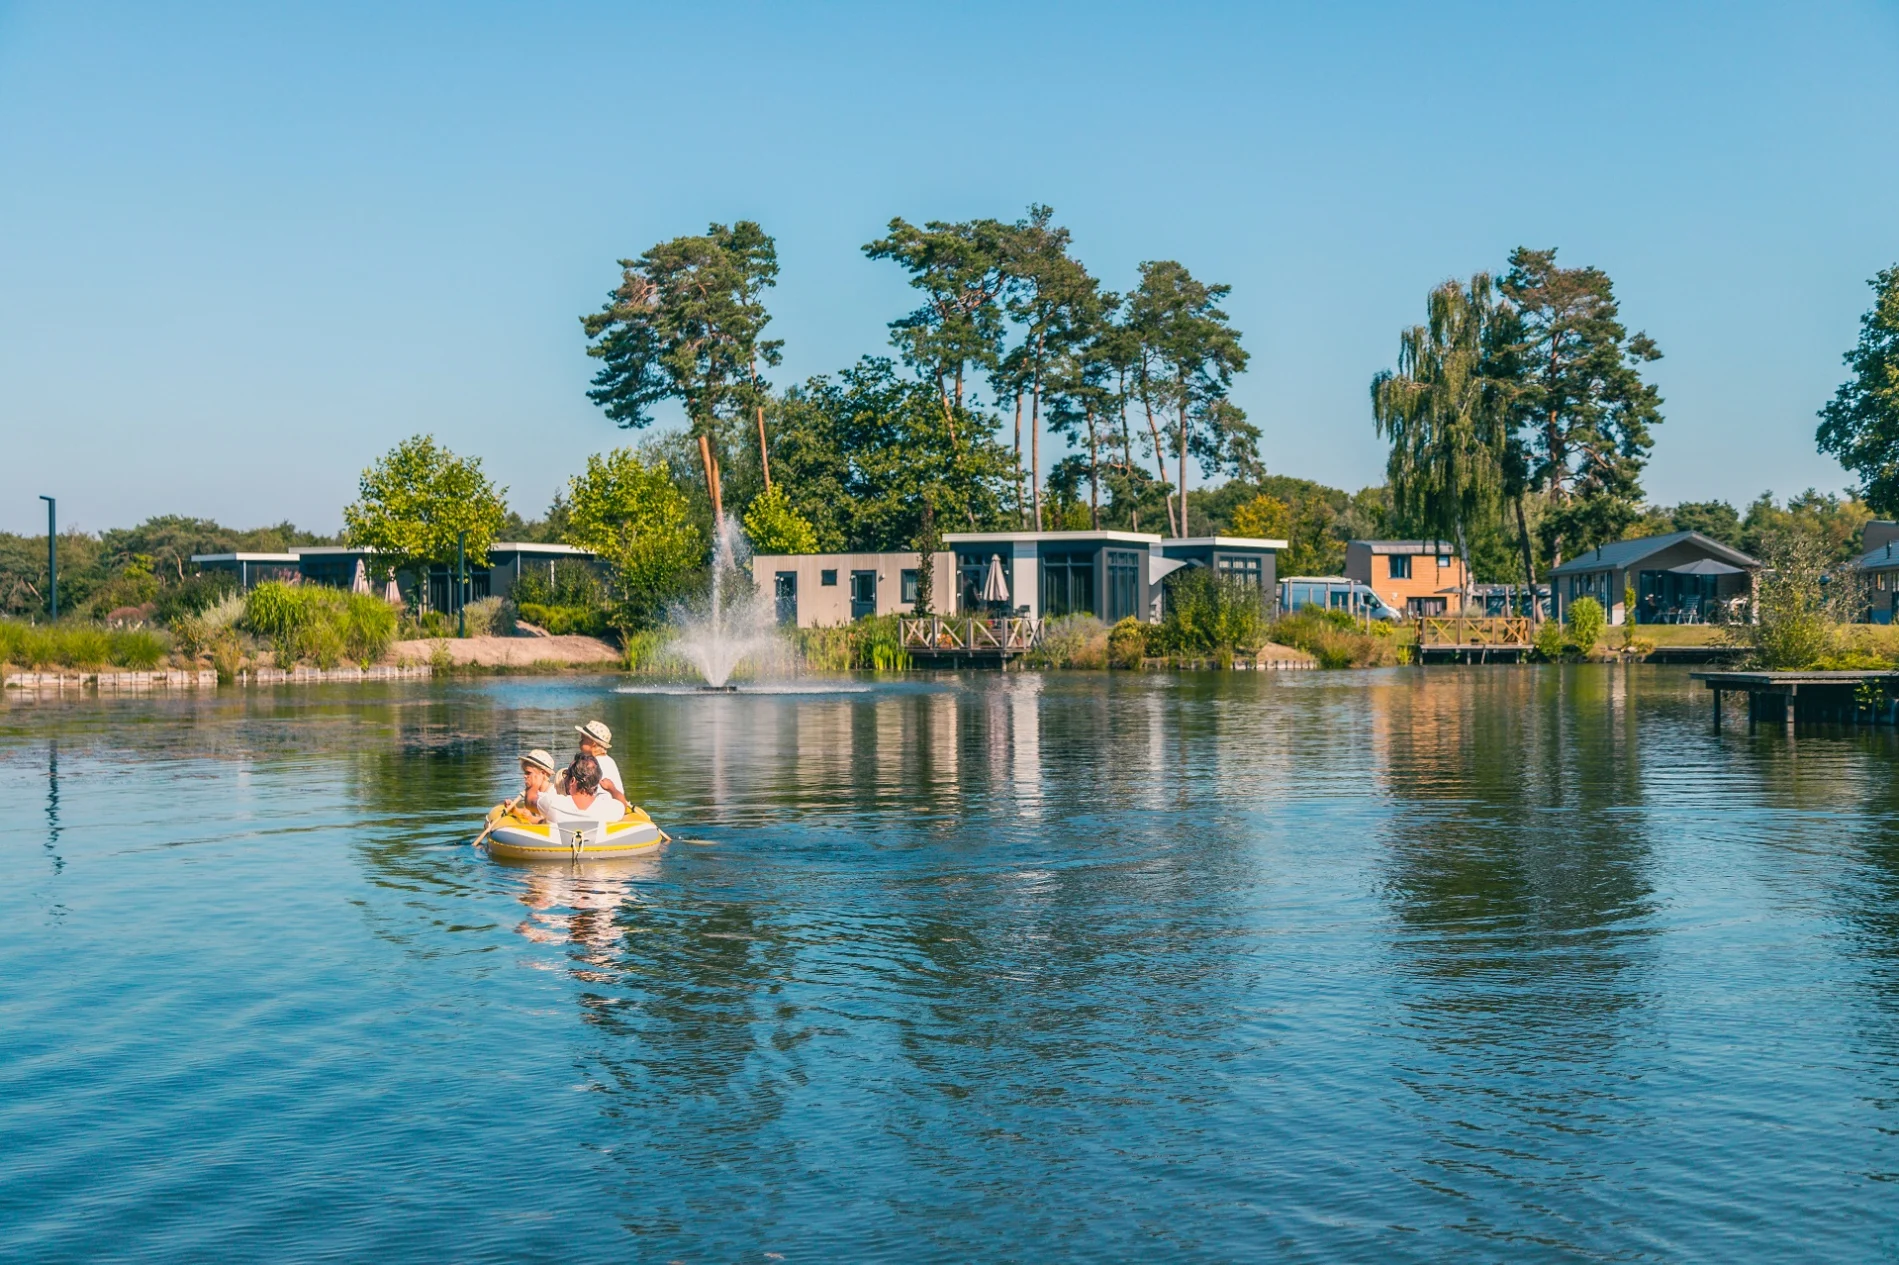 lake-summer-holiday-home-view-europarcs-zilverstrand